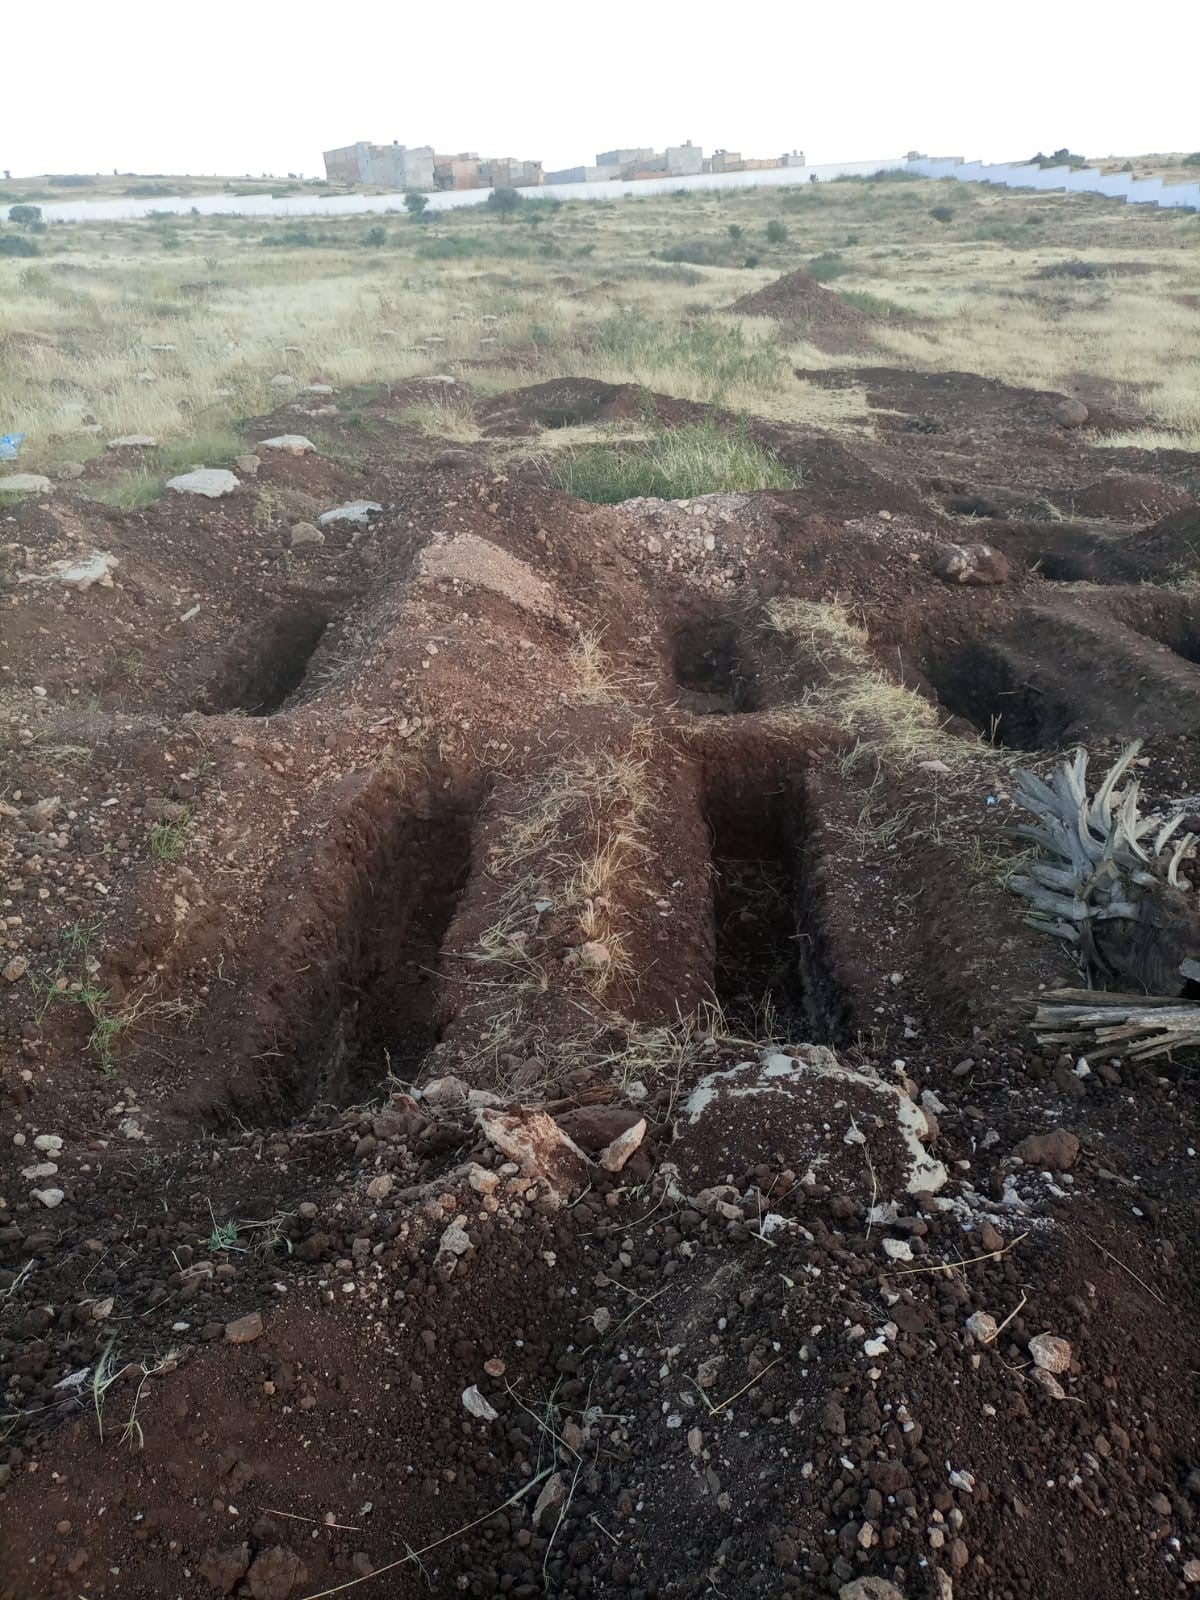 Caption: Freshly dug graves at Sidi Salem cemetery, Nador, Morocco, where local activists believe authorities plan to bury the bodies of the migrants who died during an attempt to scale the fence dividing Spain and Morocco. June 26, 2022.